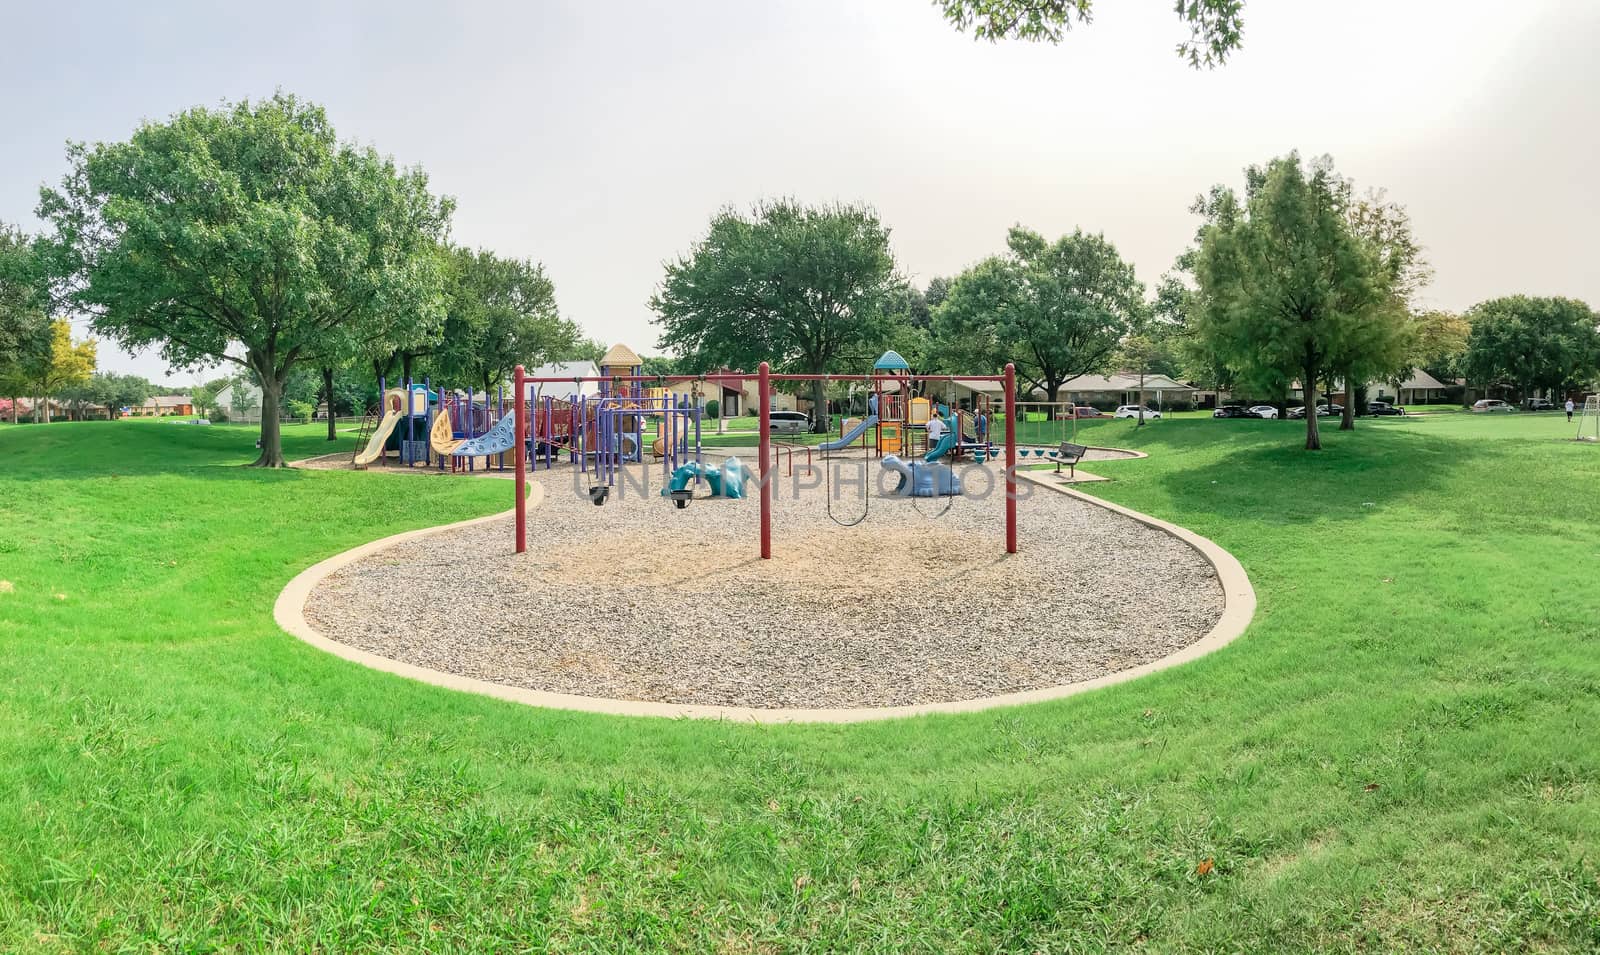 Swing set at large playground in residential neighborhood near Dallas, Texas, USA by trongnguyen